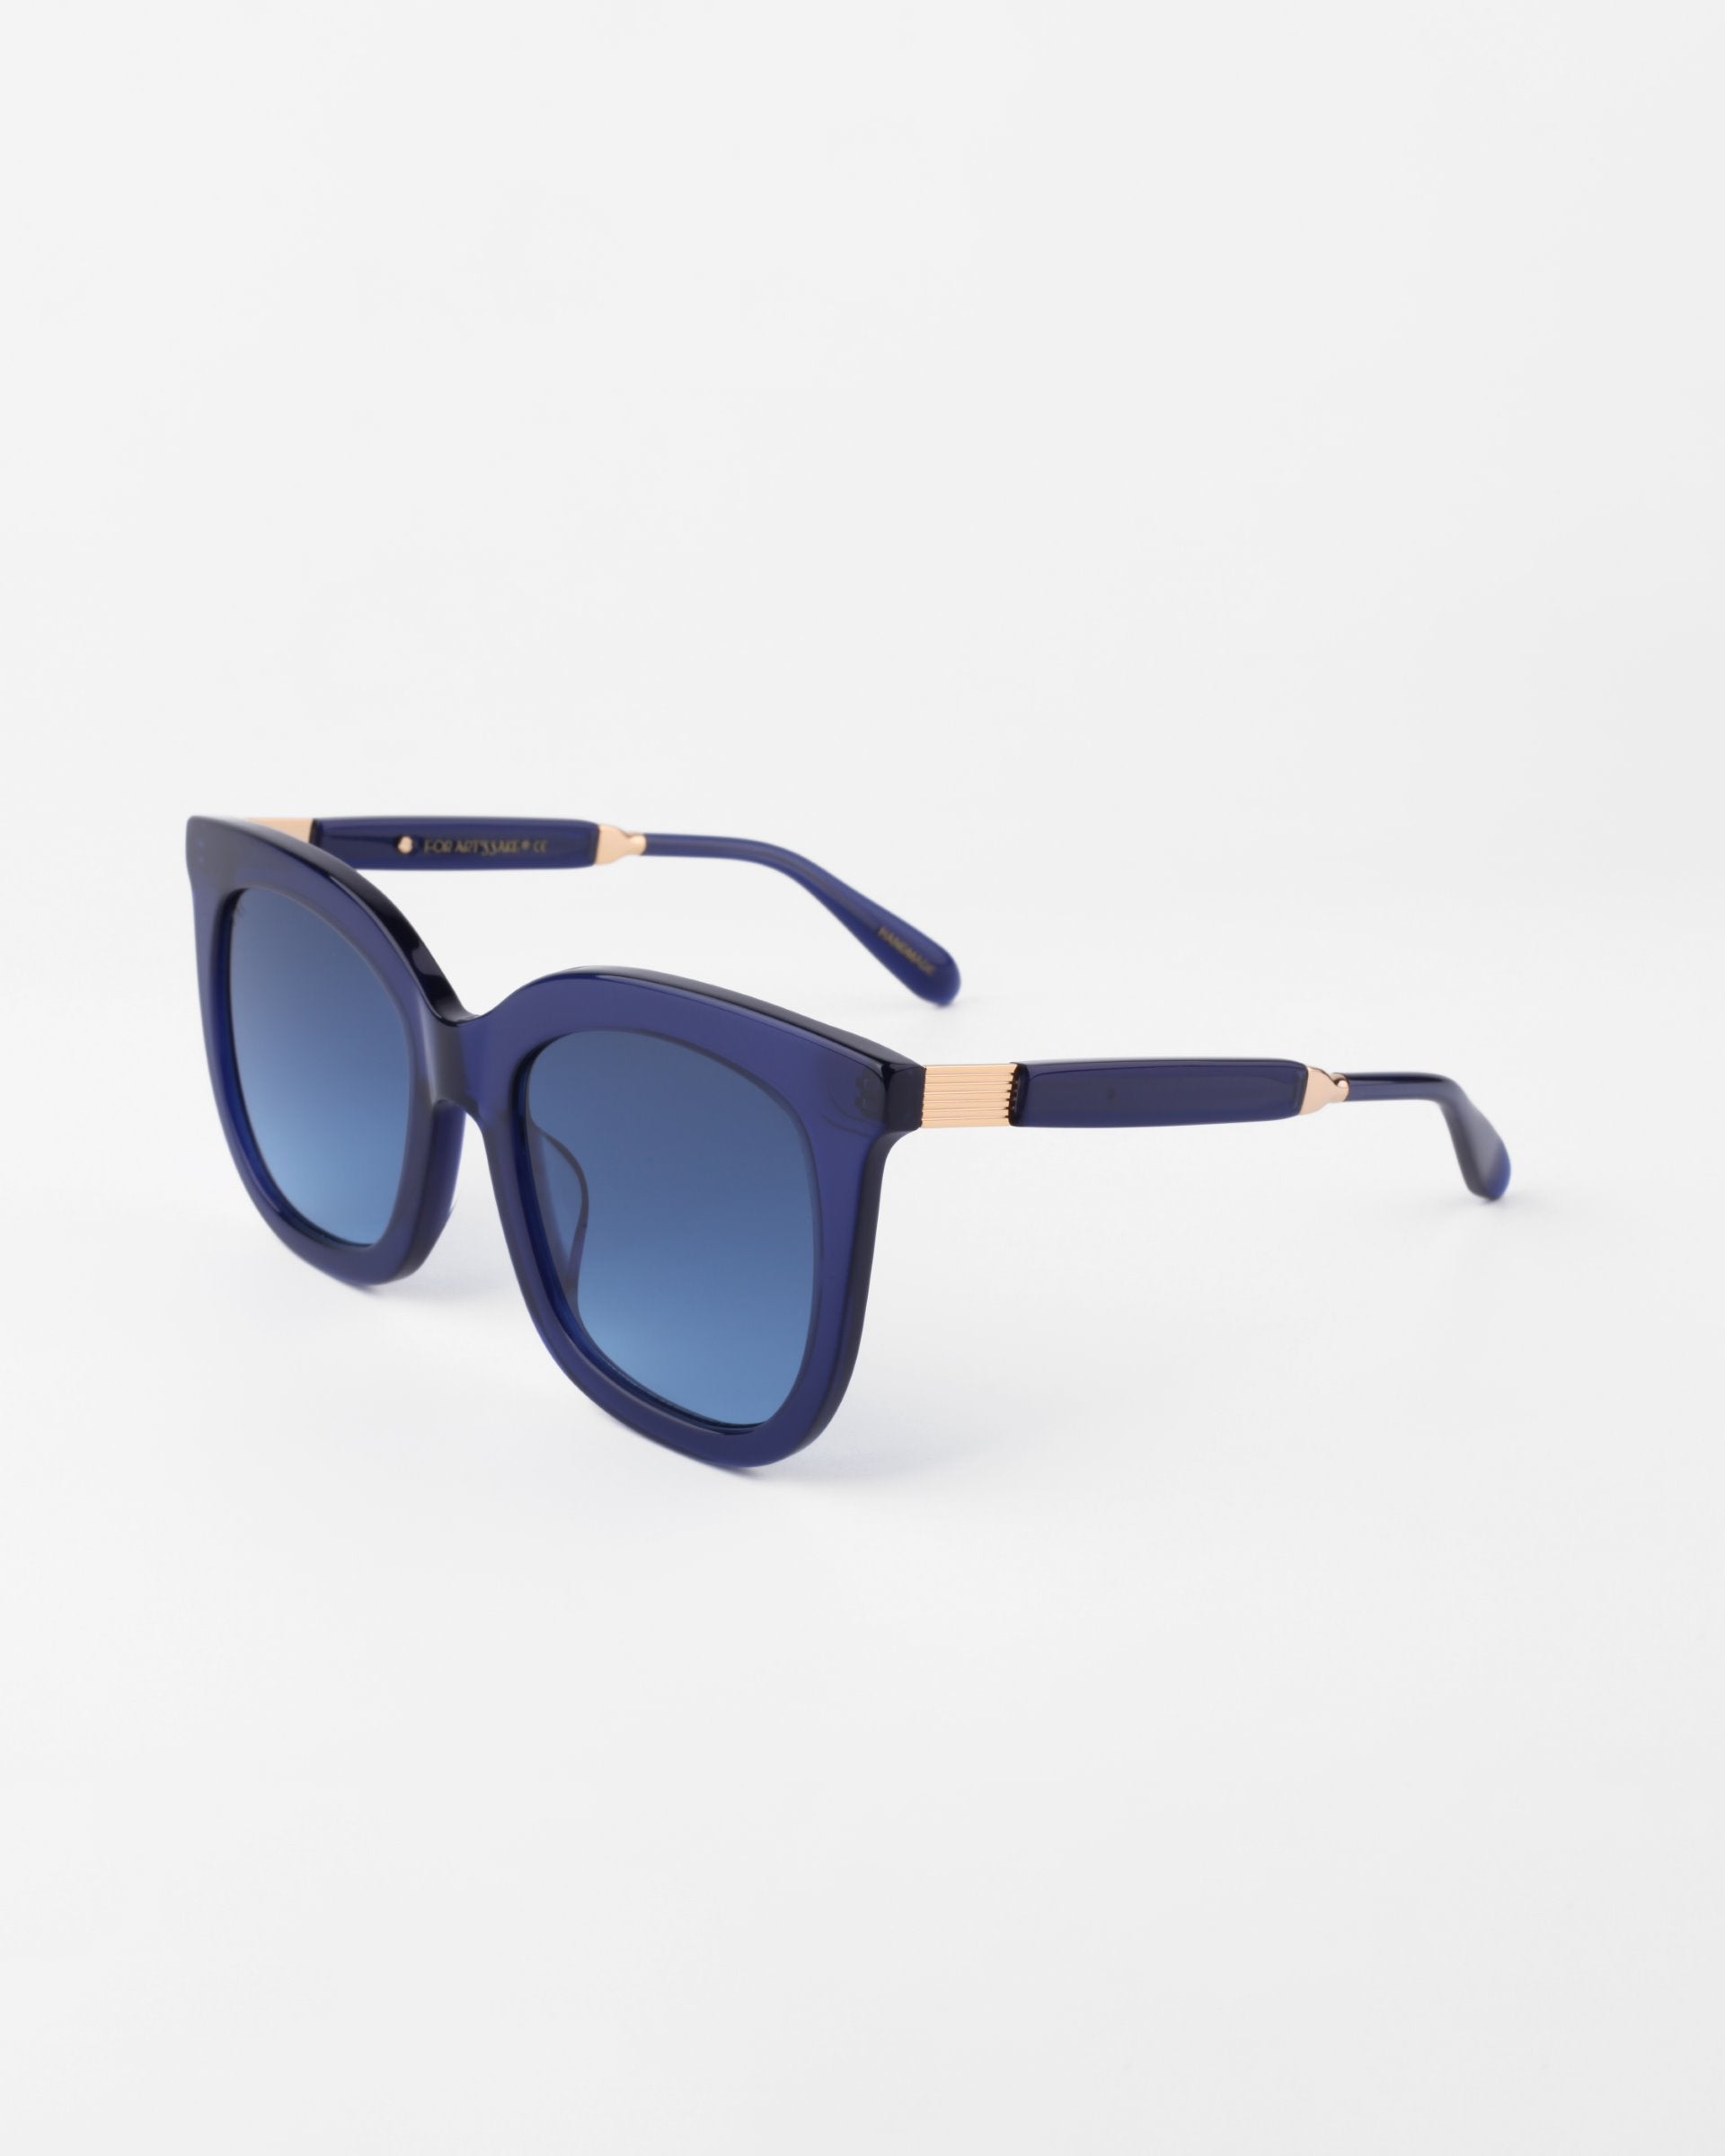 A pair of Riverside sunglasses by For Art's Sake® with square, shatter-resistant, dark blue lenses and a handmade acetate frame. The temples also feature gold-plated detailing and are similarly dark blue, adding an elegant touch to the design. The Riverside sunglasses are set against a plain white background.